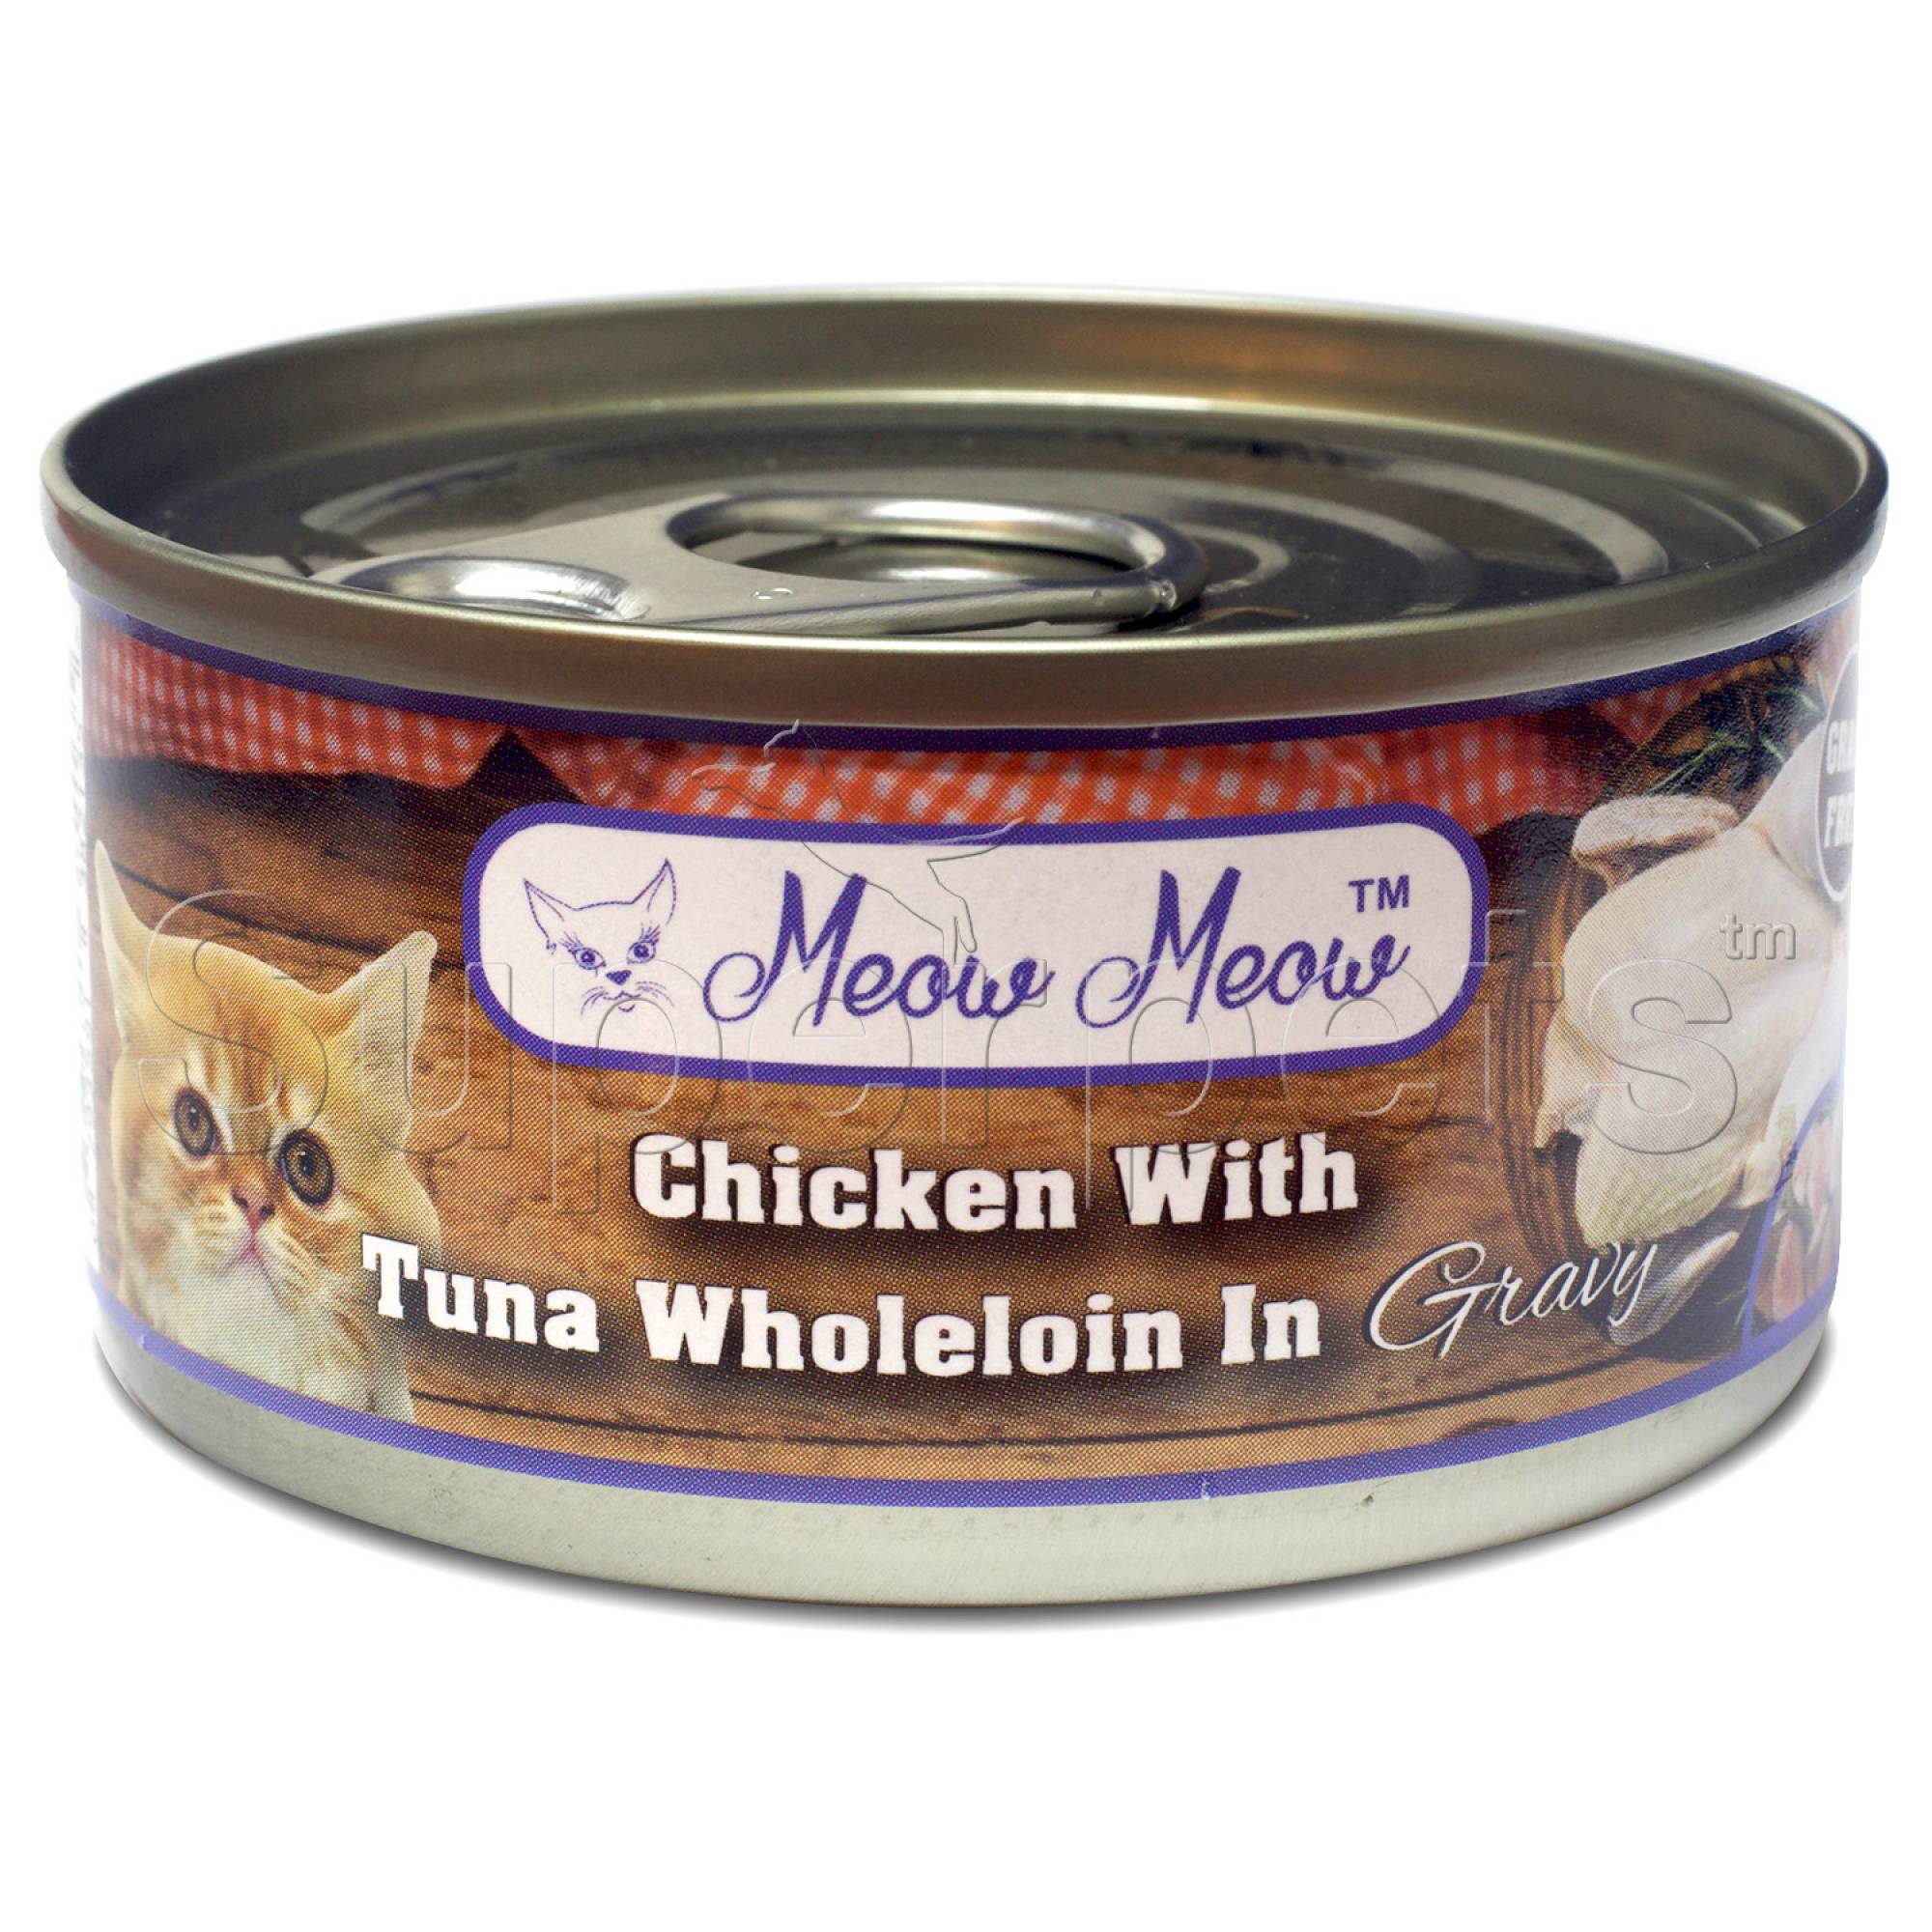 Meow Meow - Chicken with Tuna Whole Loin in Gravy - Grain Free 80g